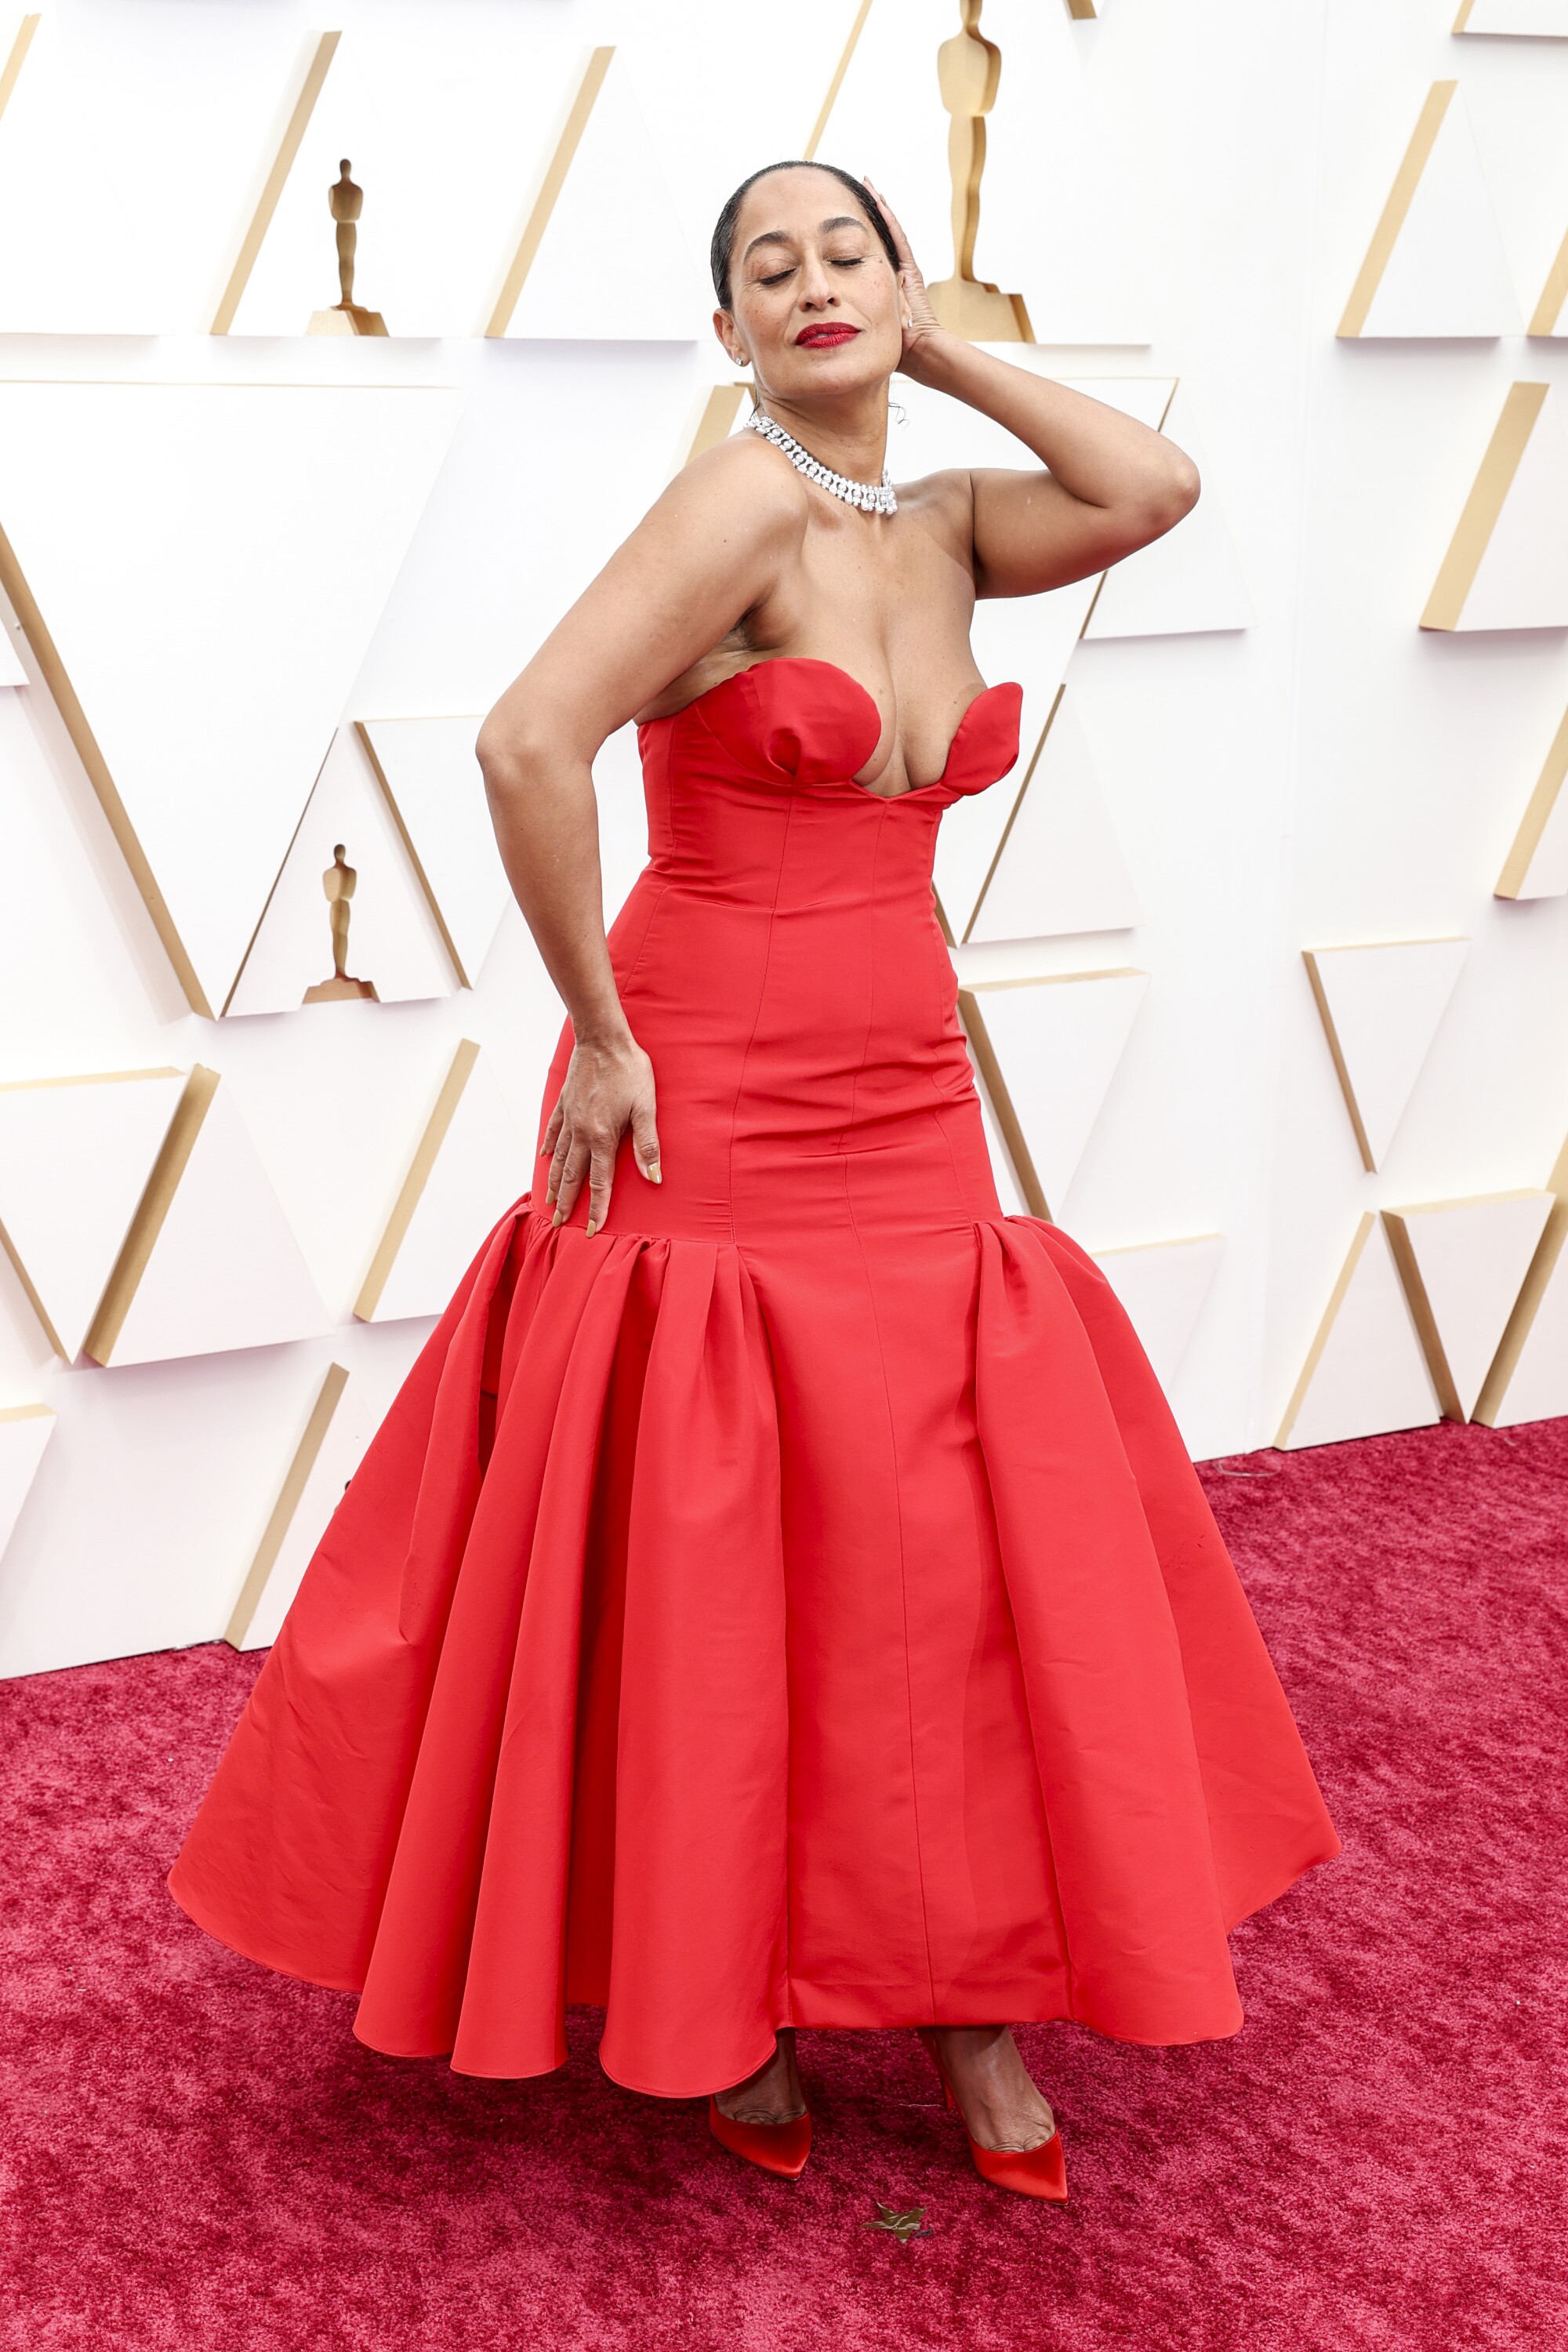 A woman shows off her red gown on the red carpet at the Oscars 2022.